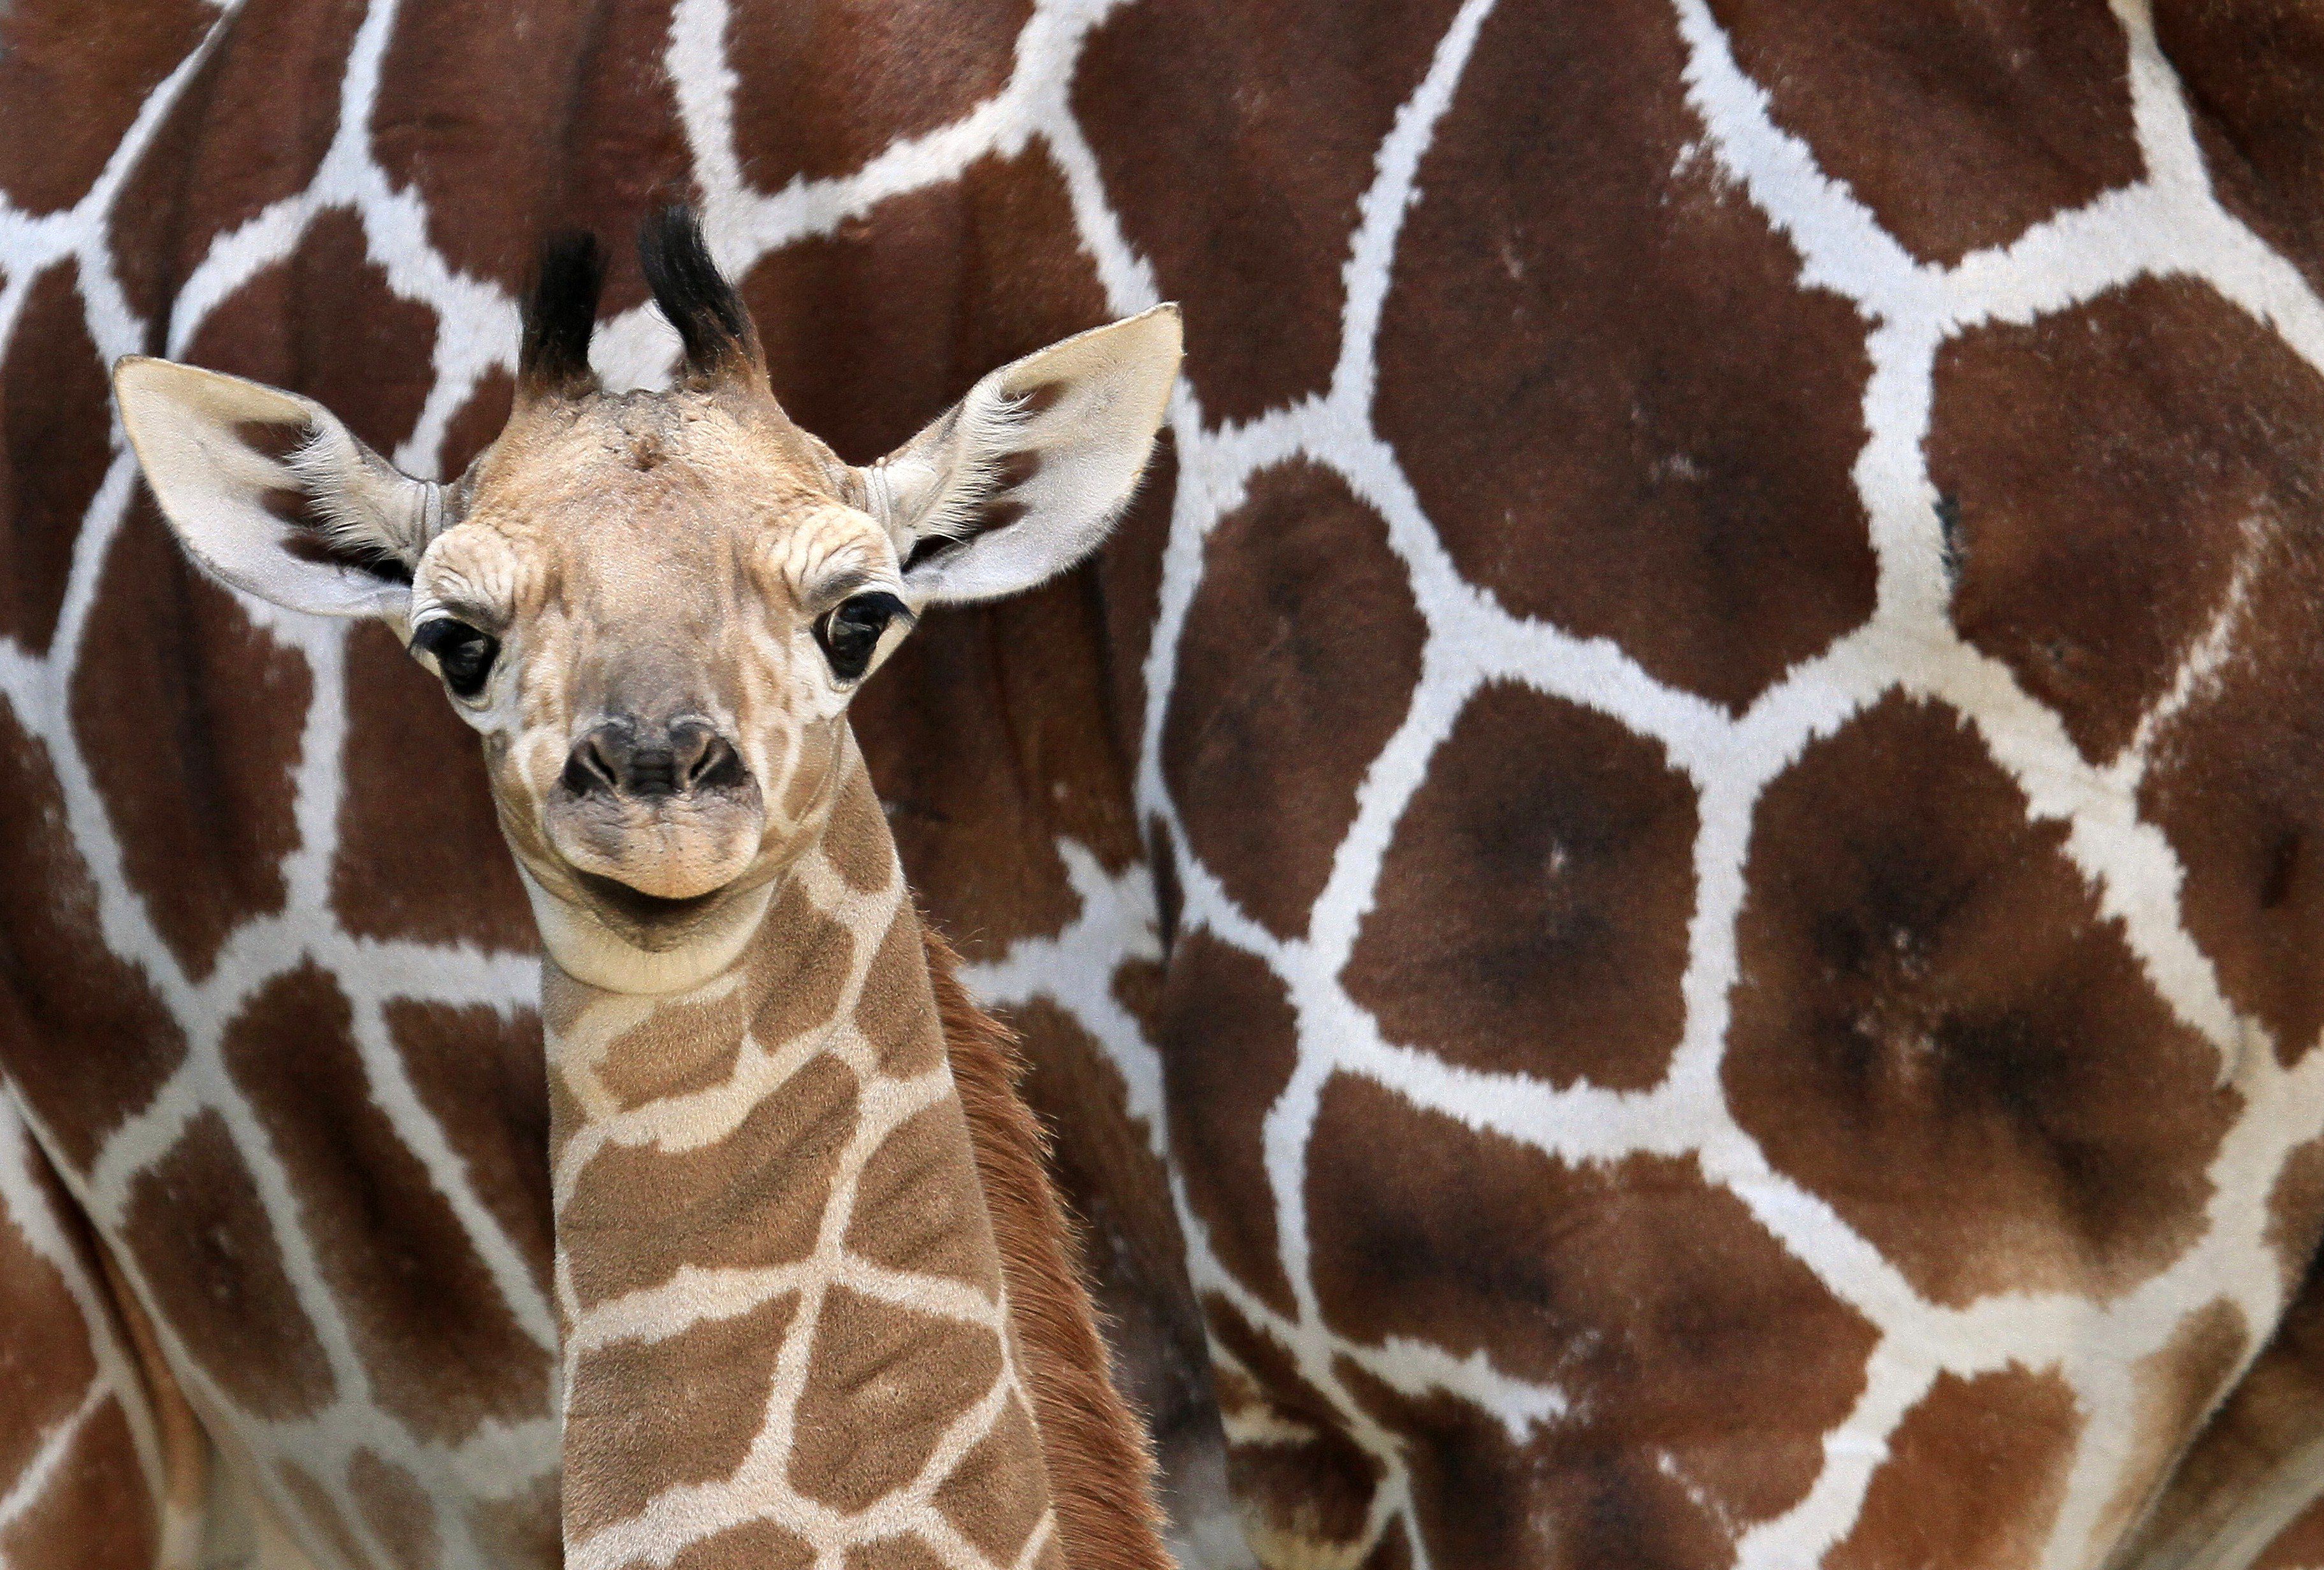 New-born giraffe stays close to its mother Janette at an enclosure at a zoo in Brono